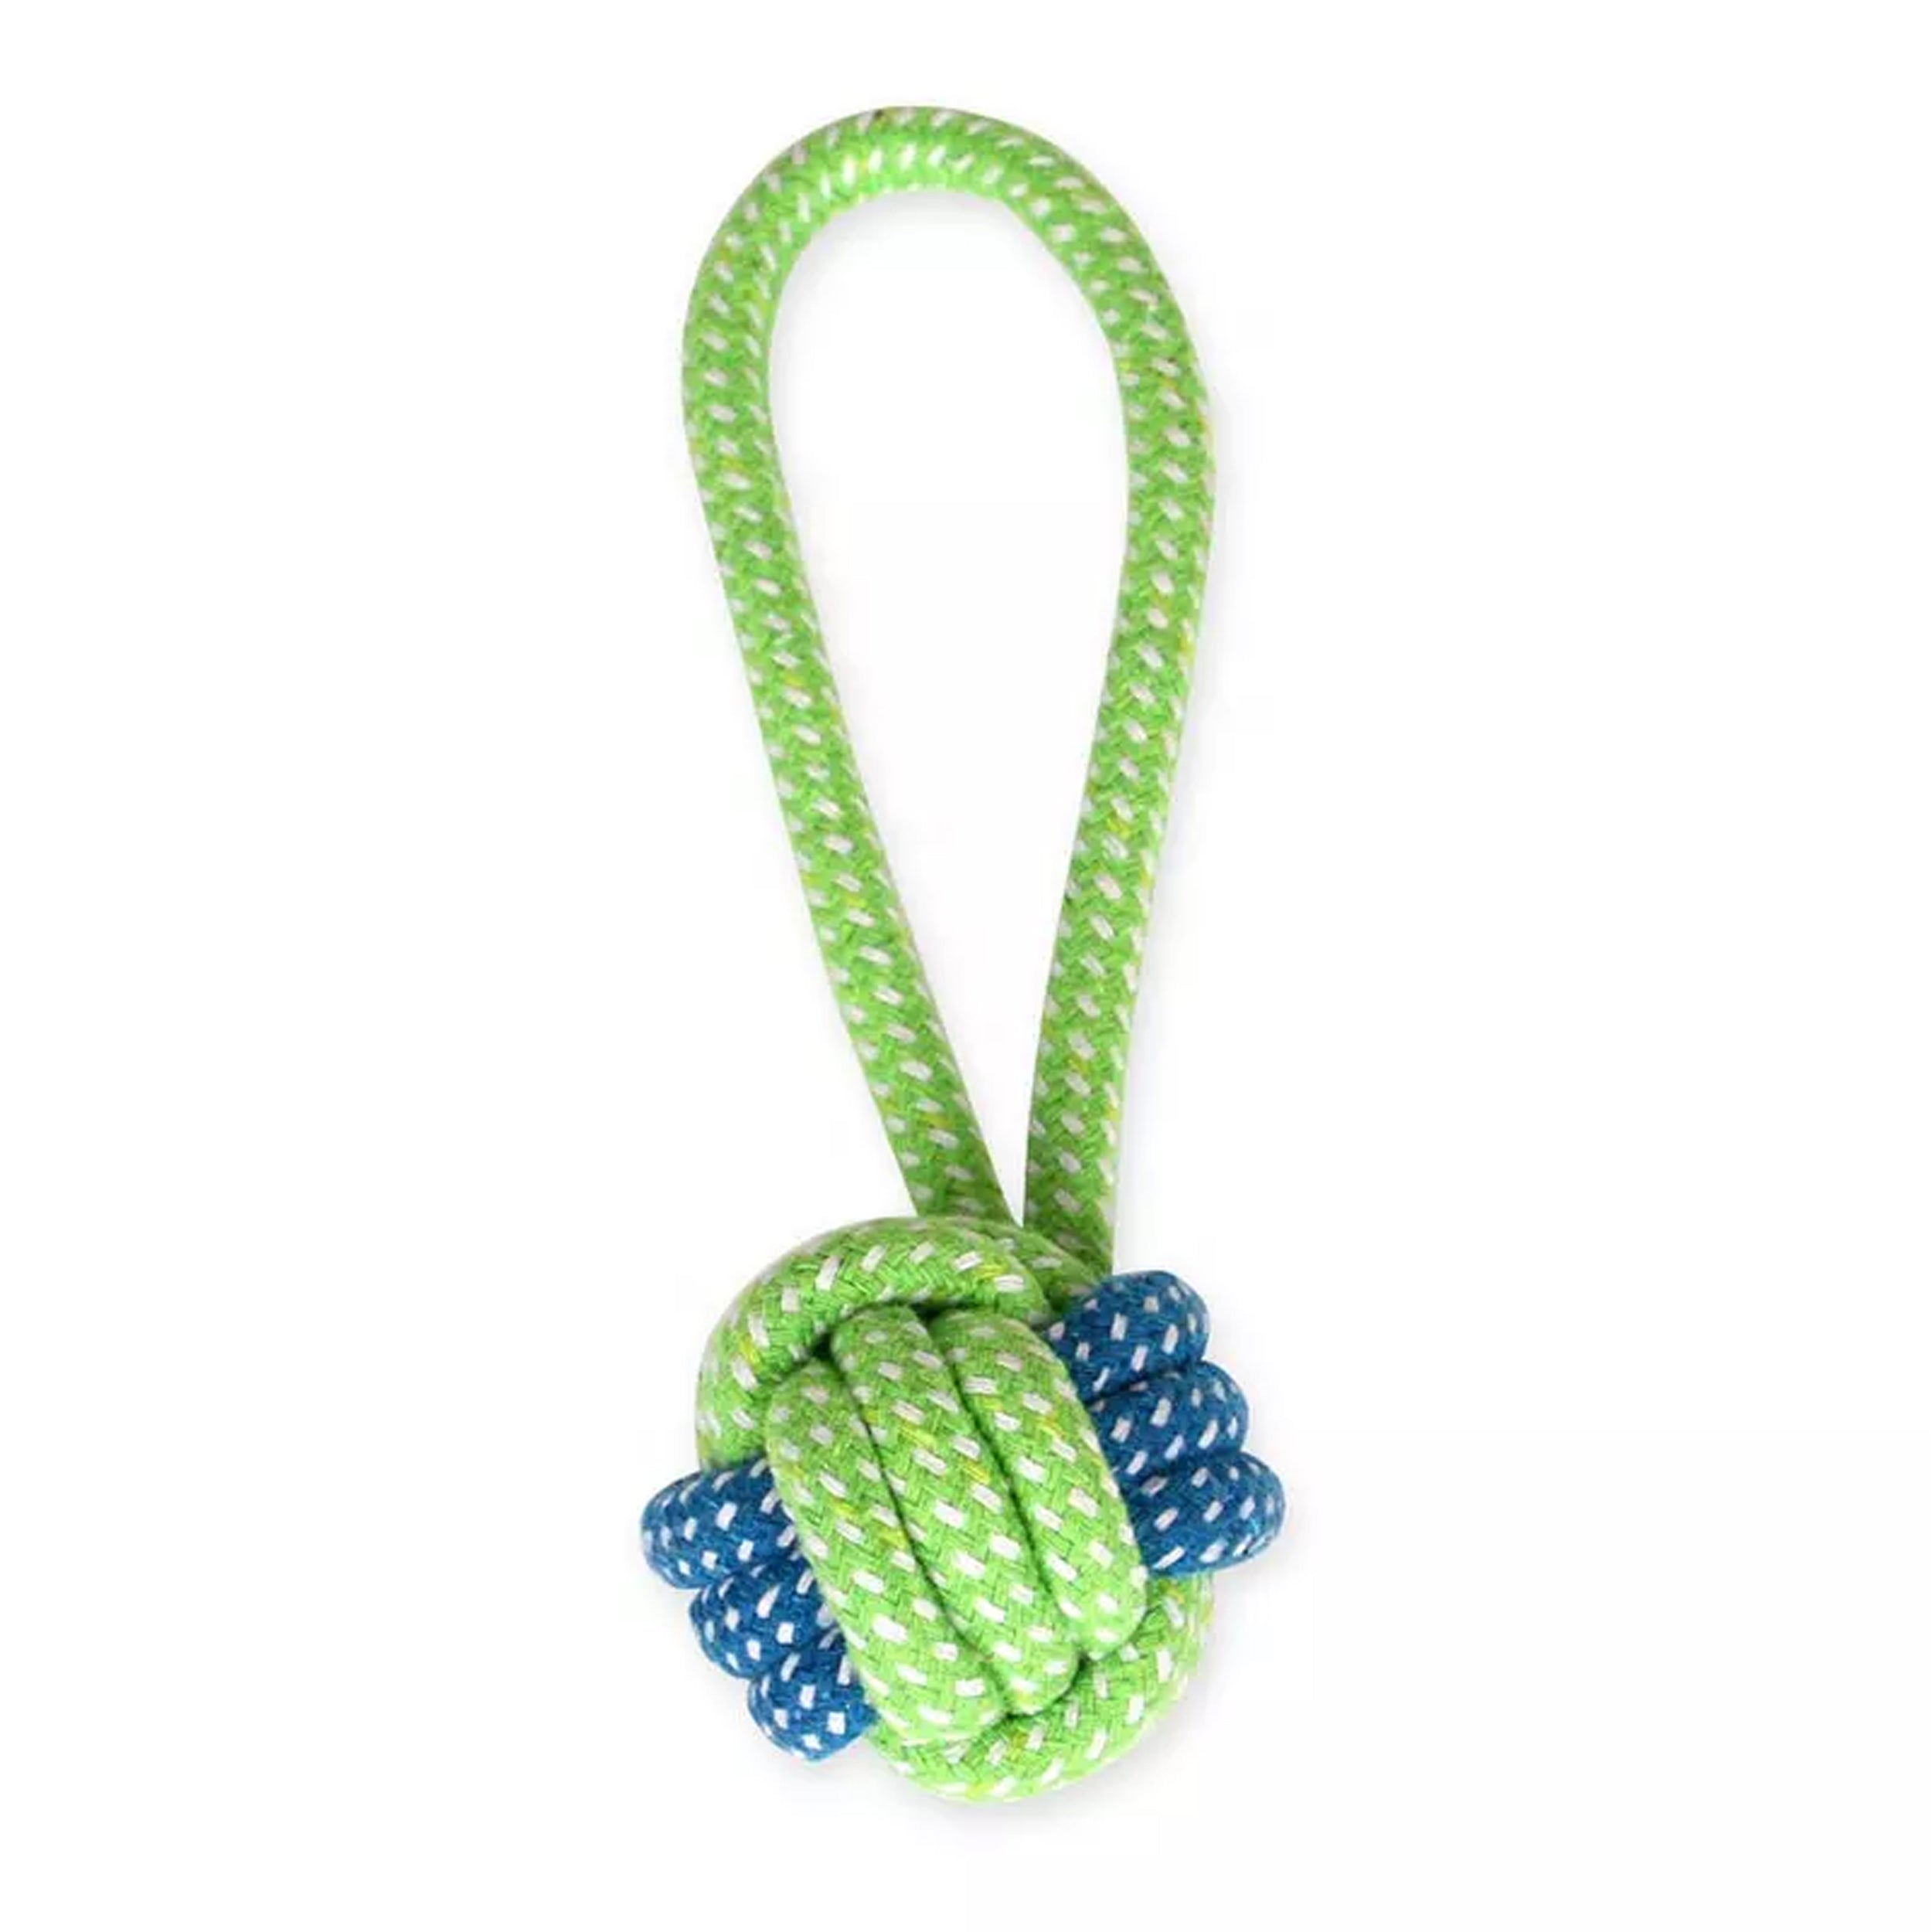 cotton rope ball shape dog chew toy with latch